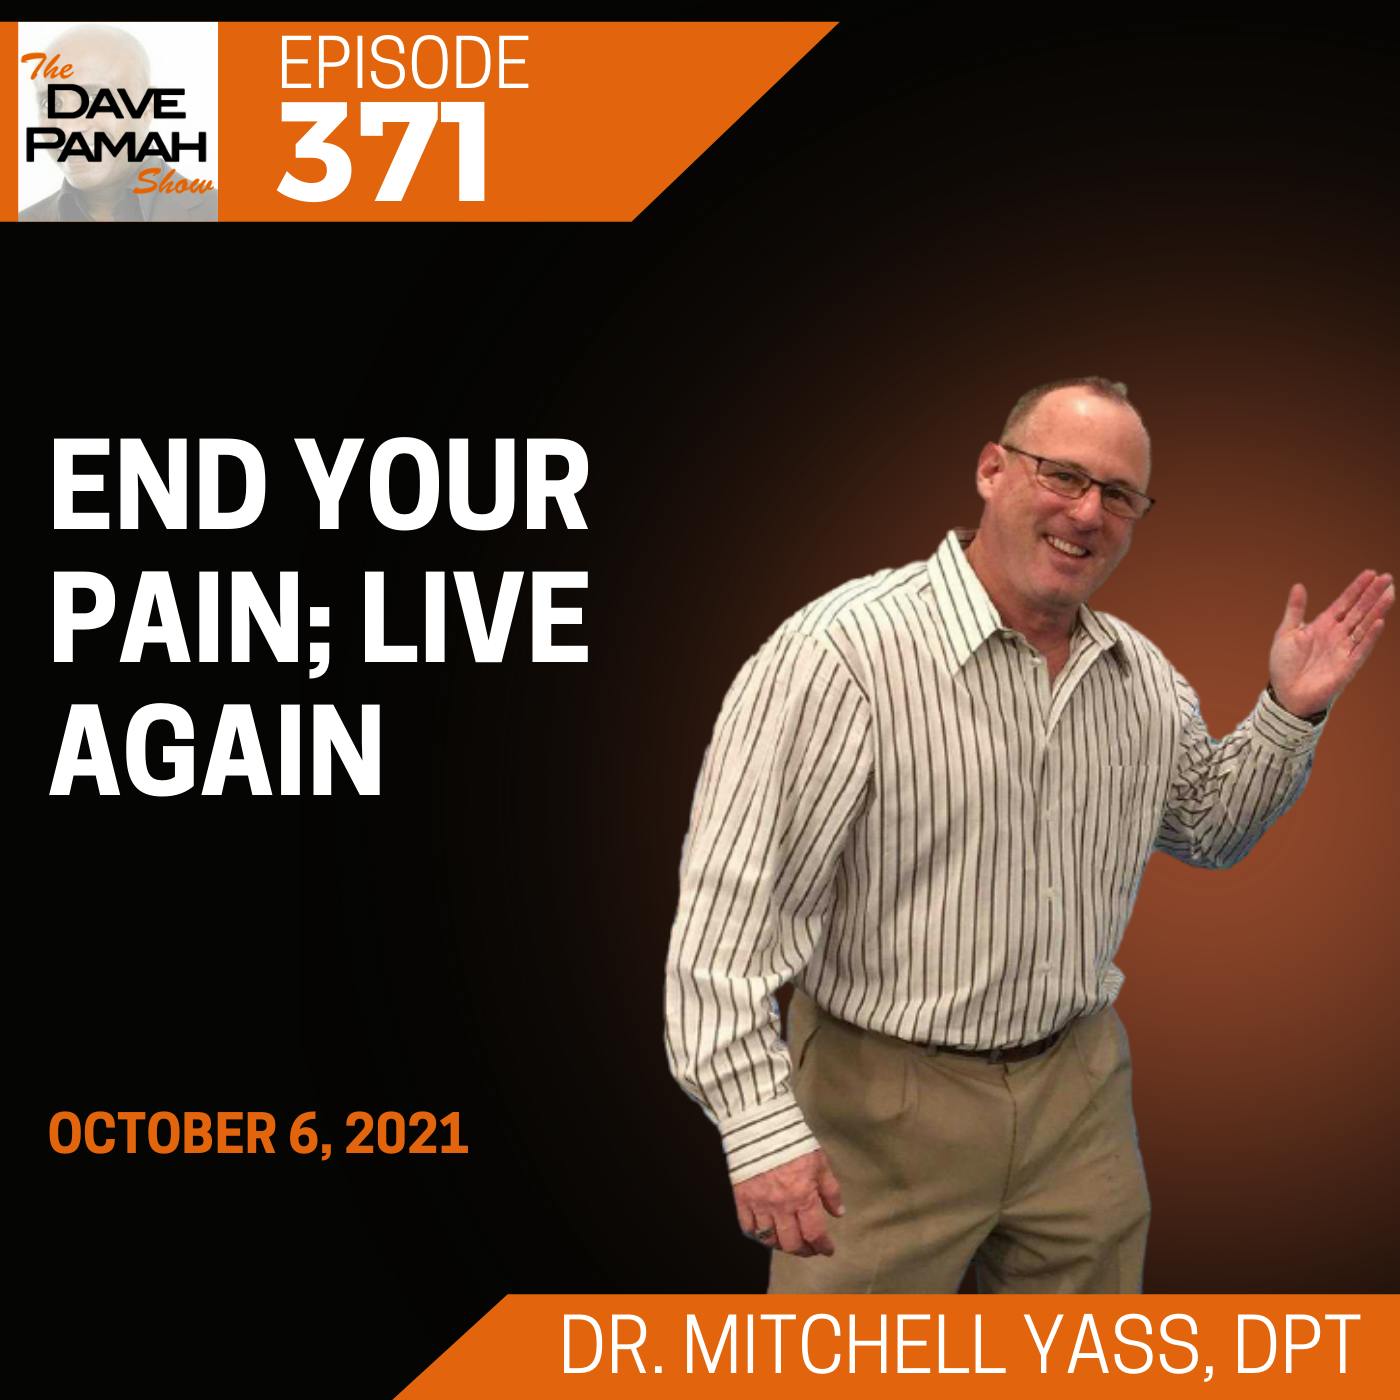 End your pain; live again with Dr. Mitchell Yass, DPT